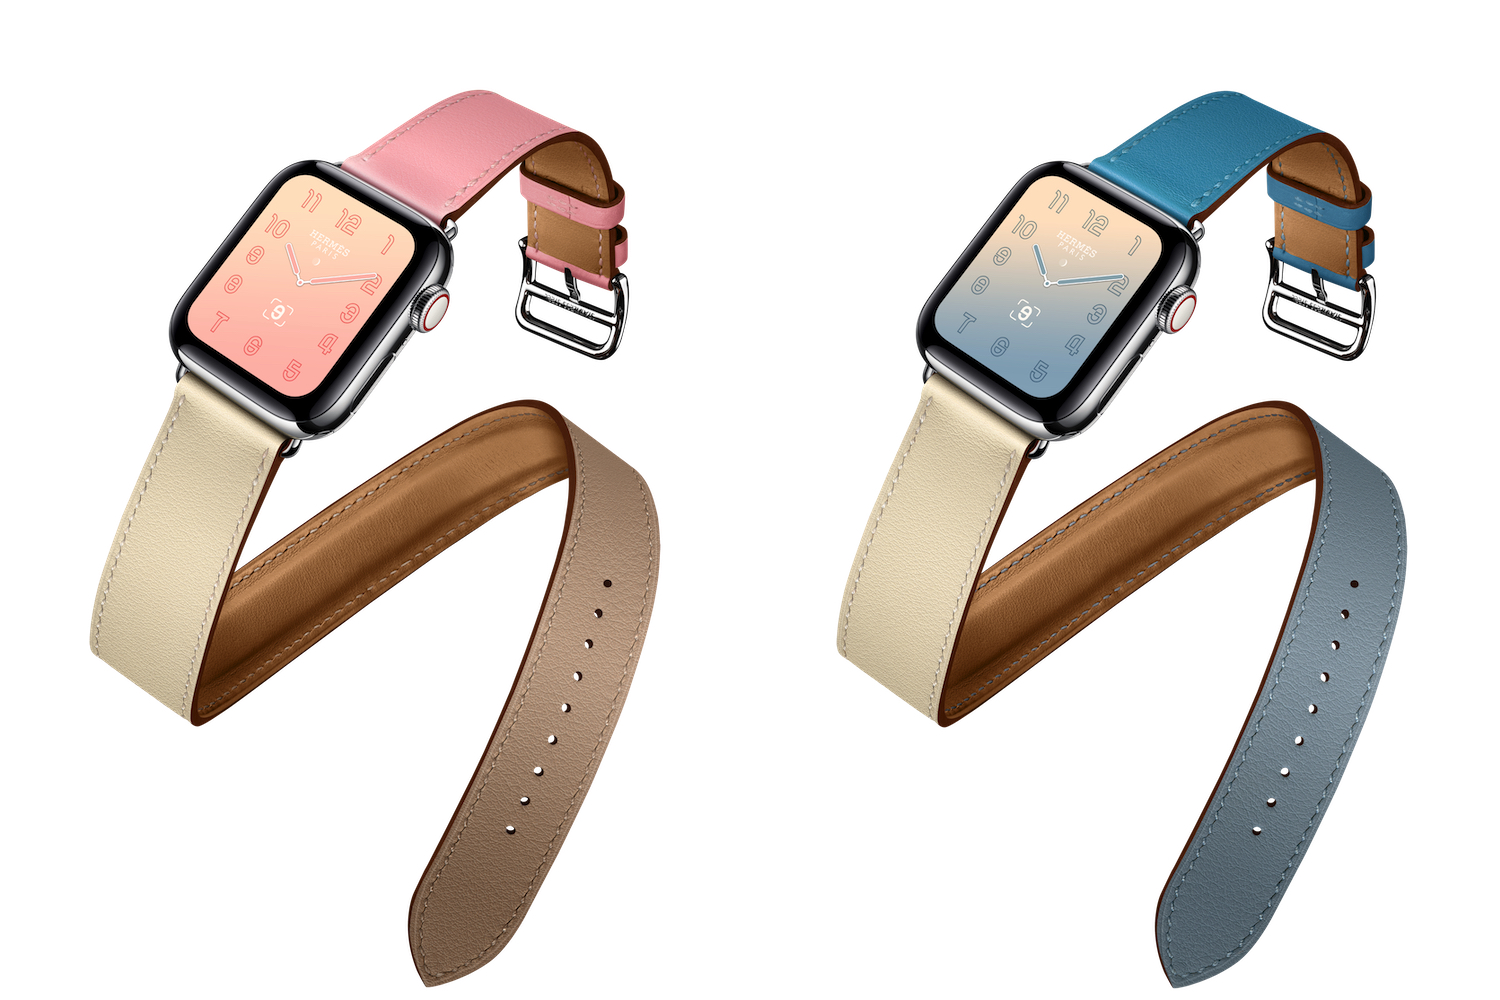 New Apple Watch Hermes Straps, Now Available Separately From Apple Watch